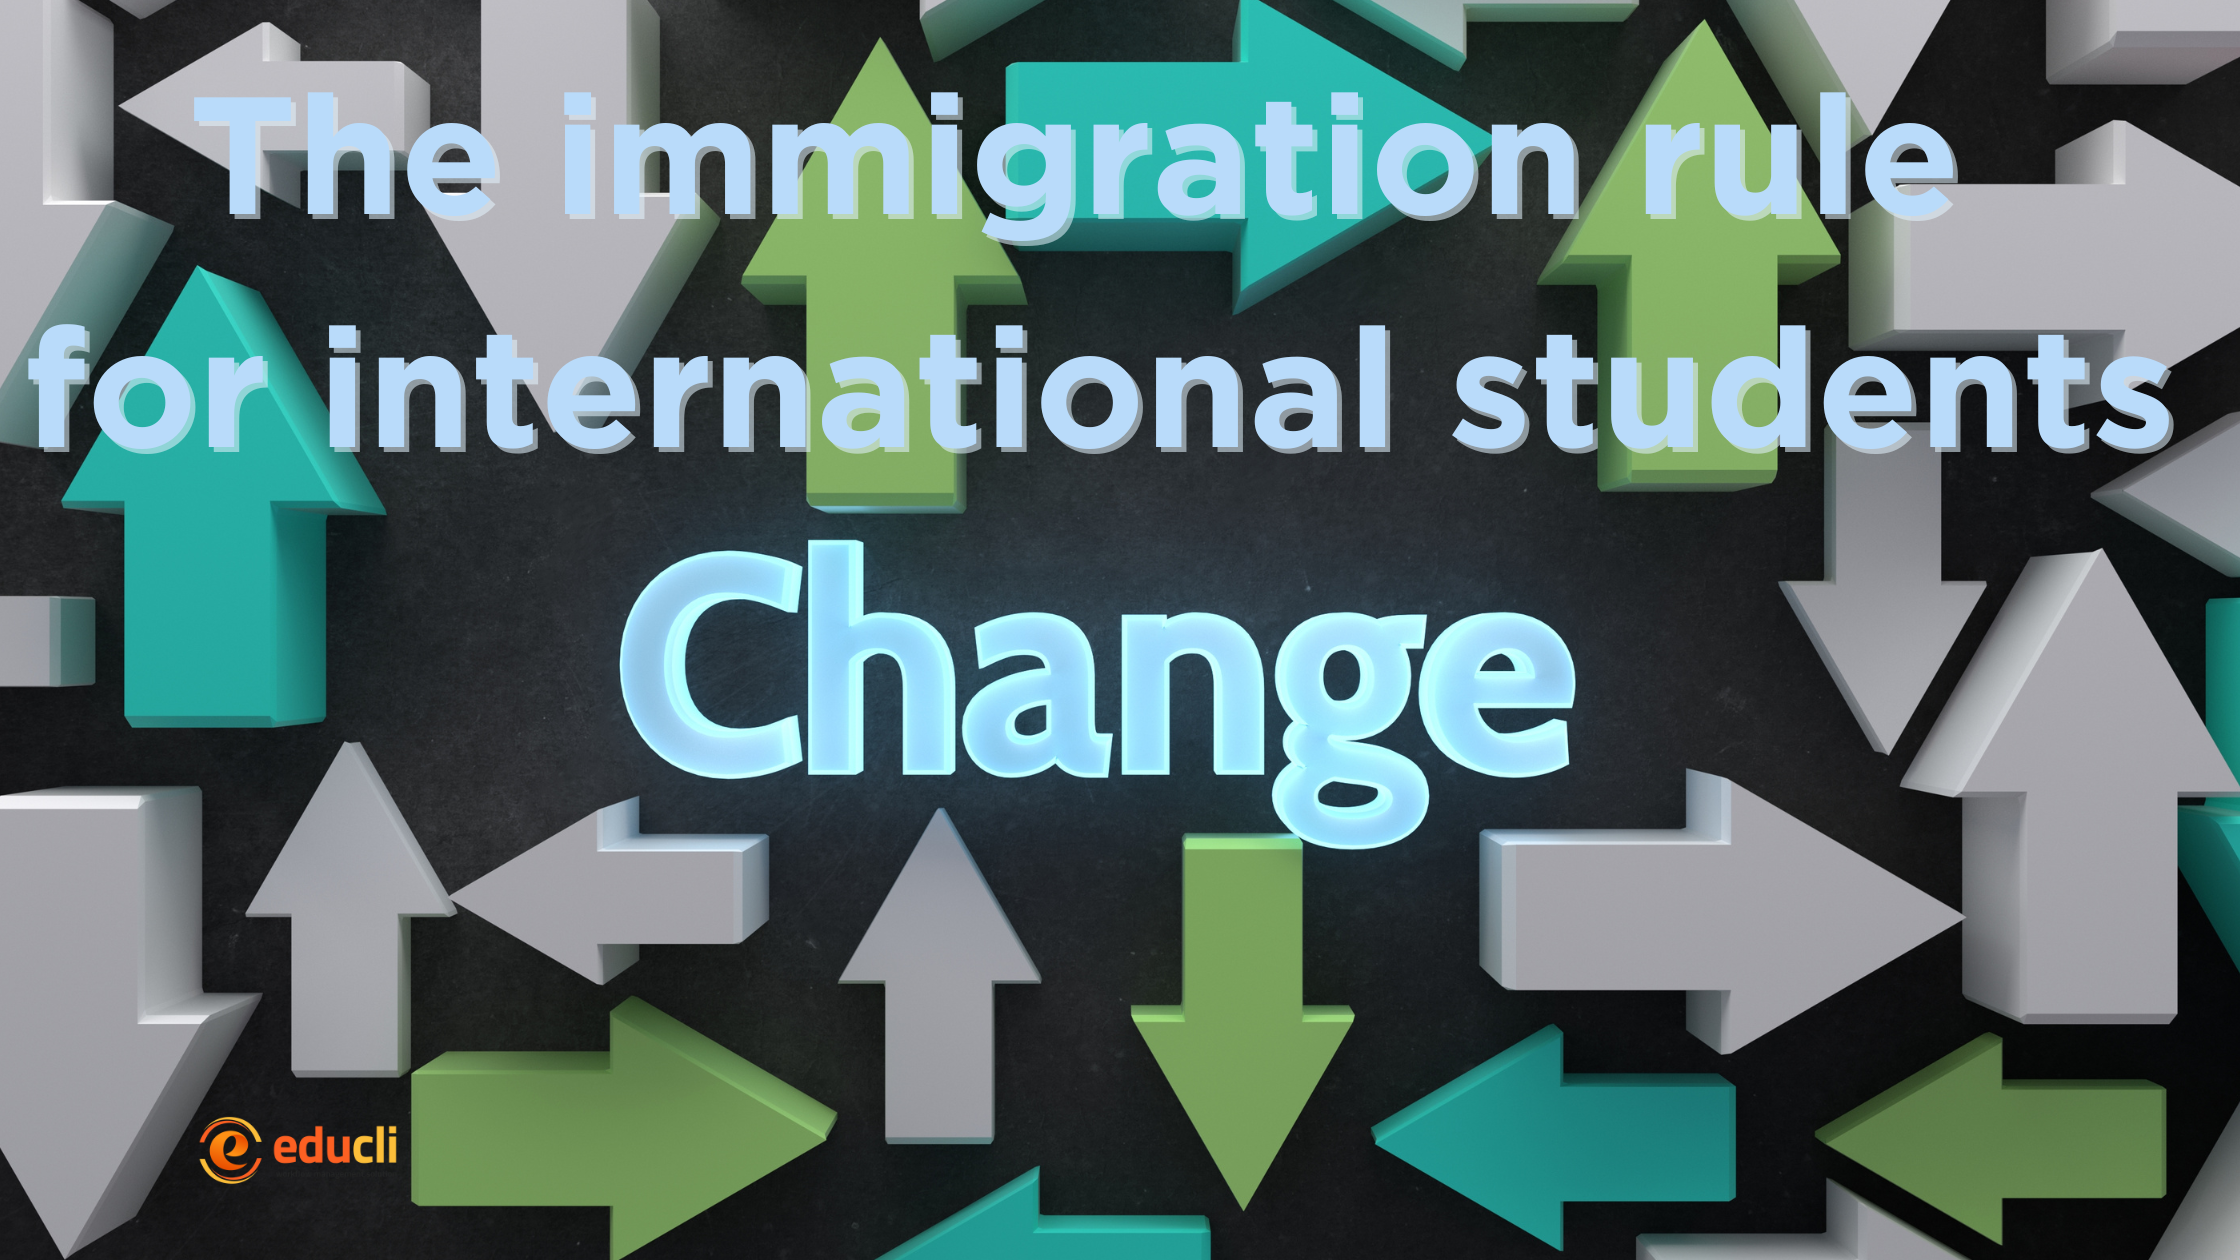 The immigration rule for international students is to change